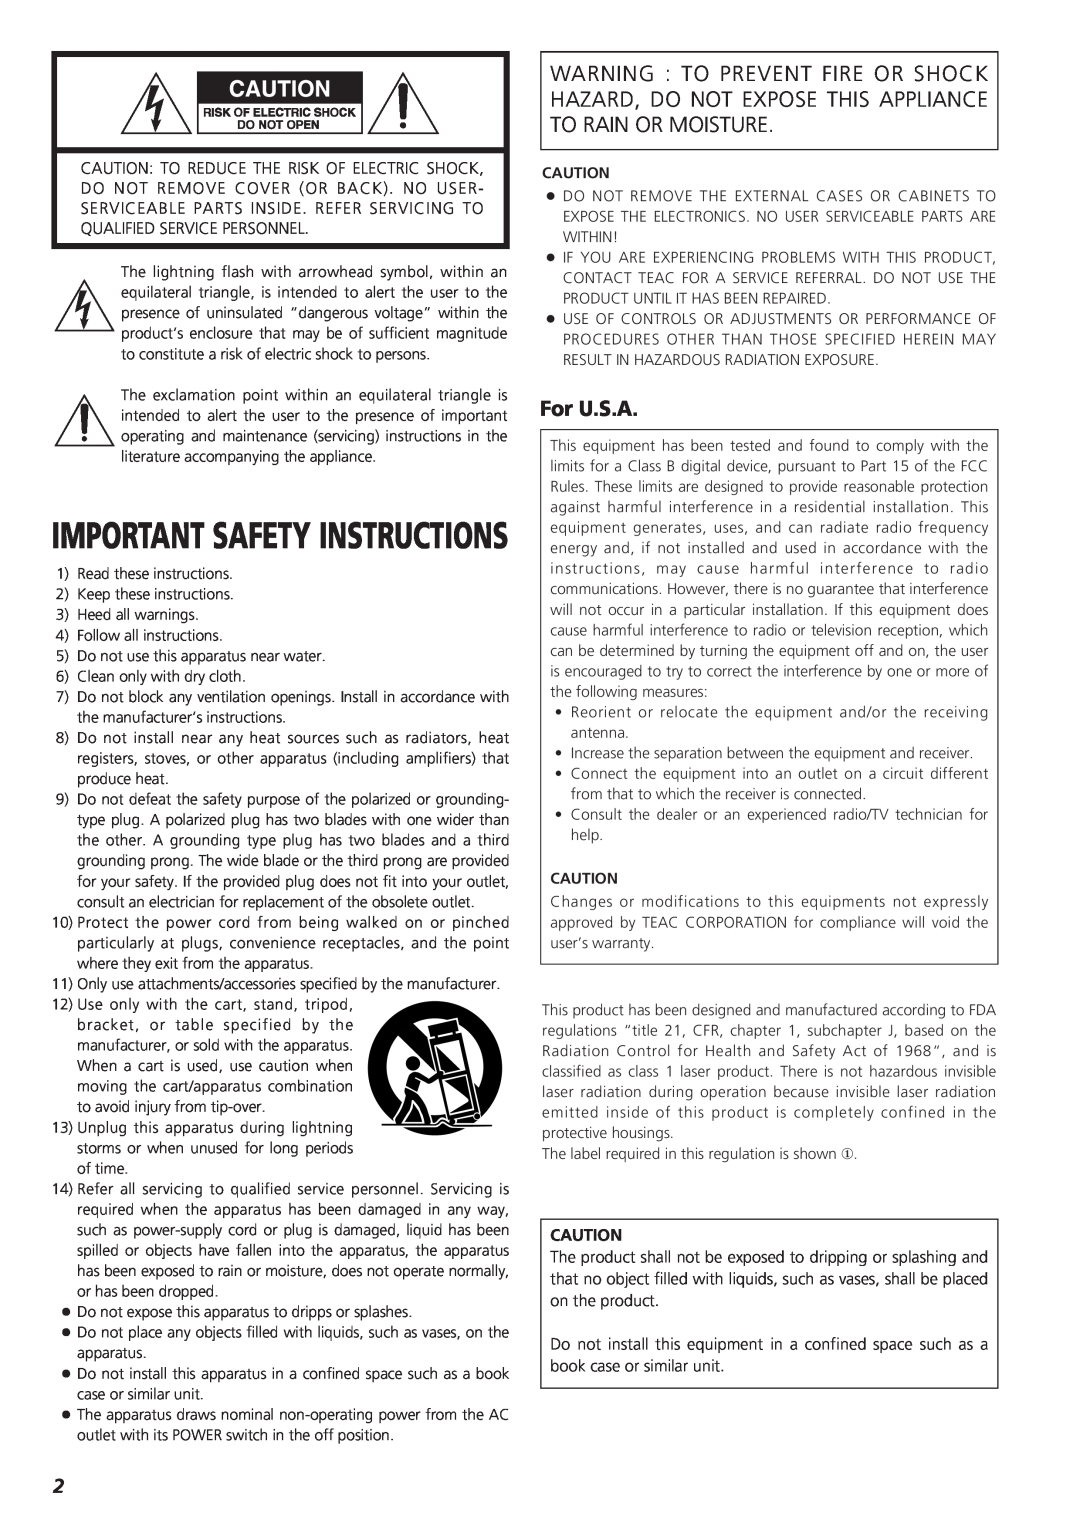 Teac G-0s owner manual For U.S.A, Important Safety Instructions 